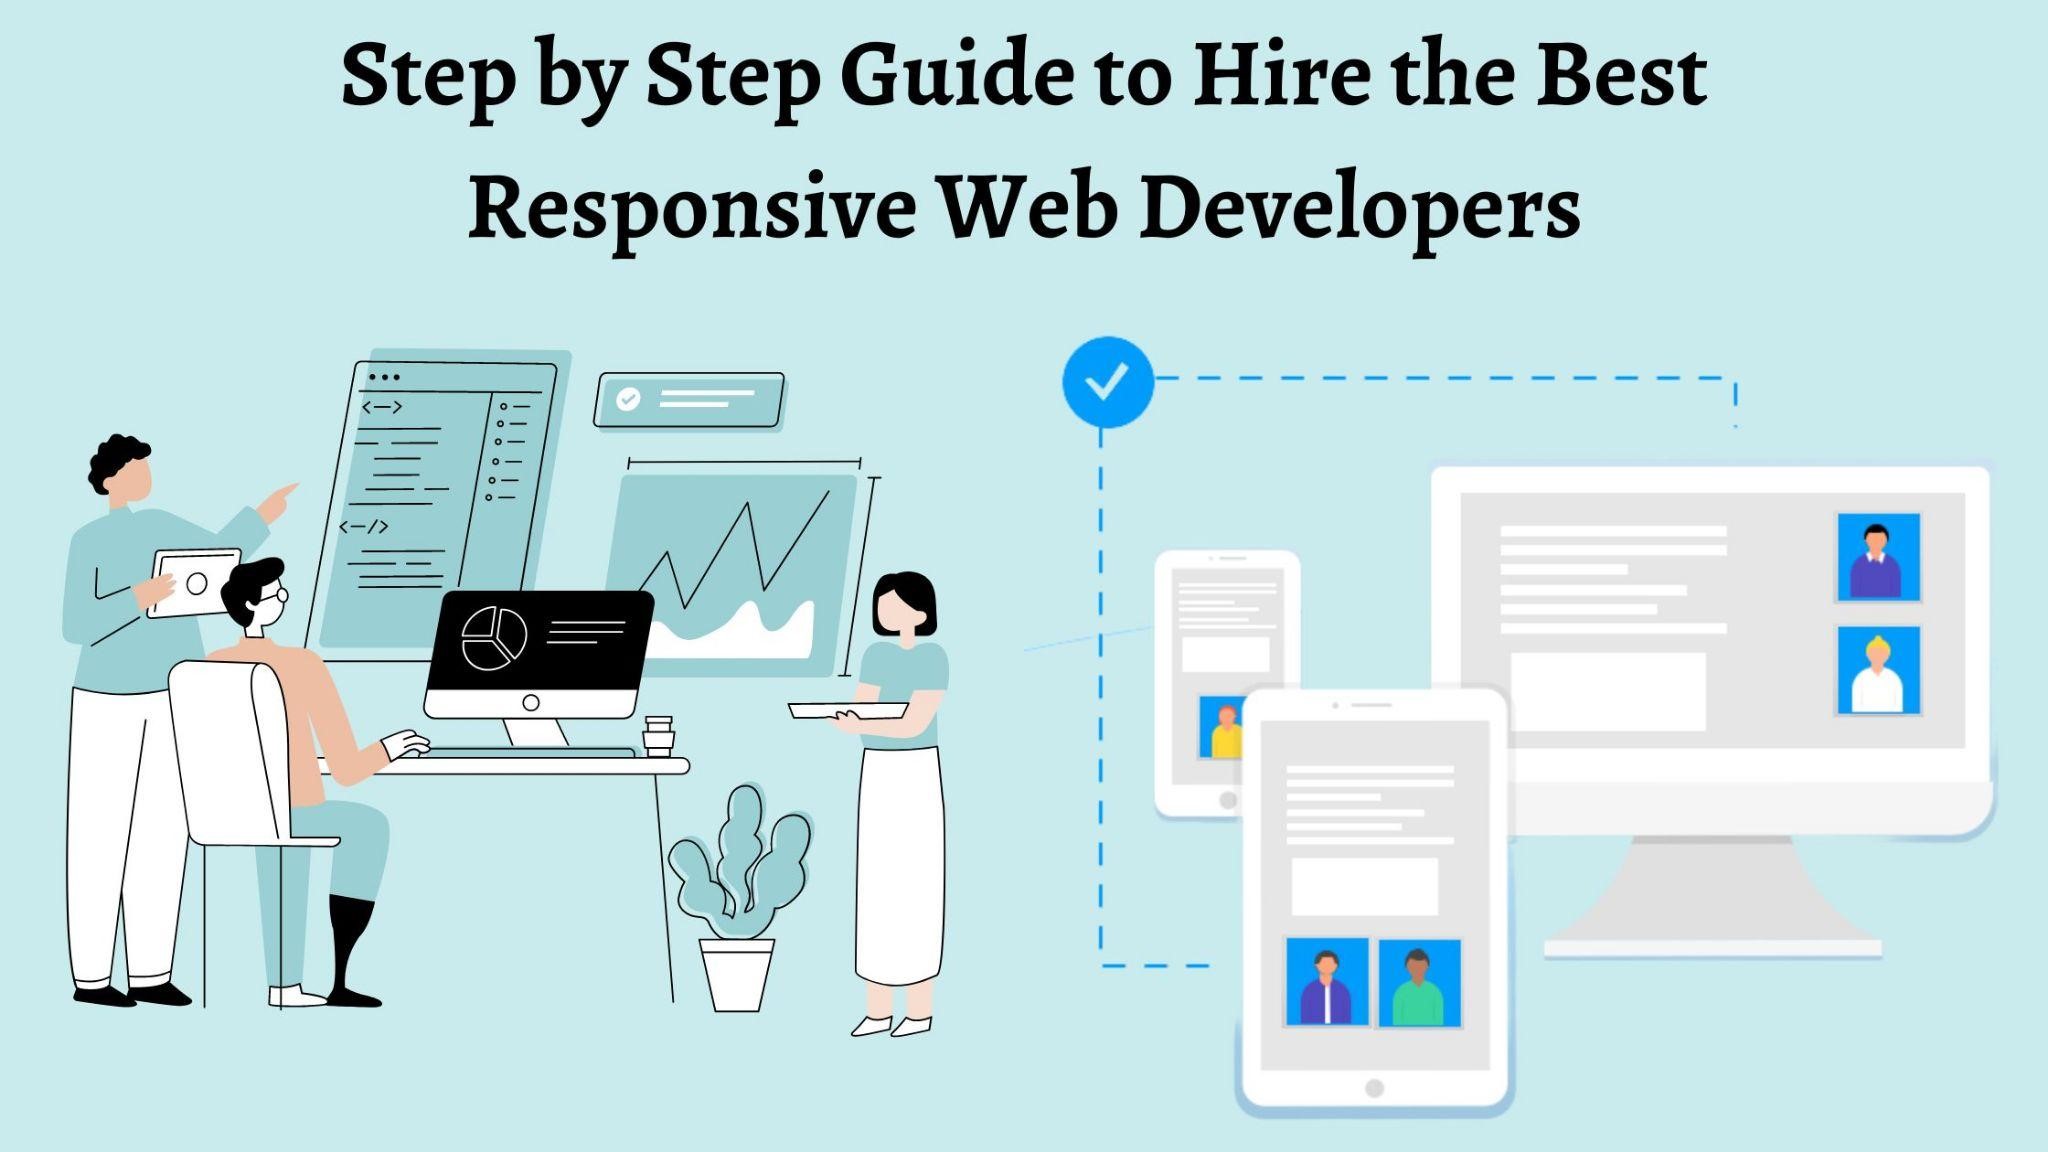 Step by Step Guide to Hire the Best Responsive Web Developers